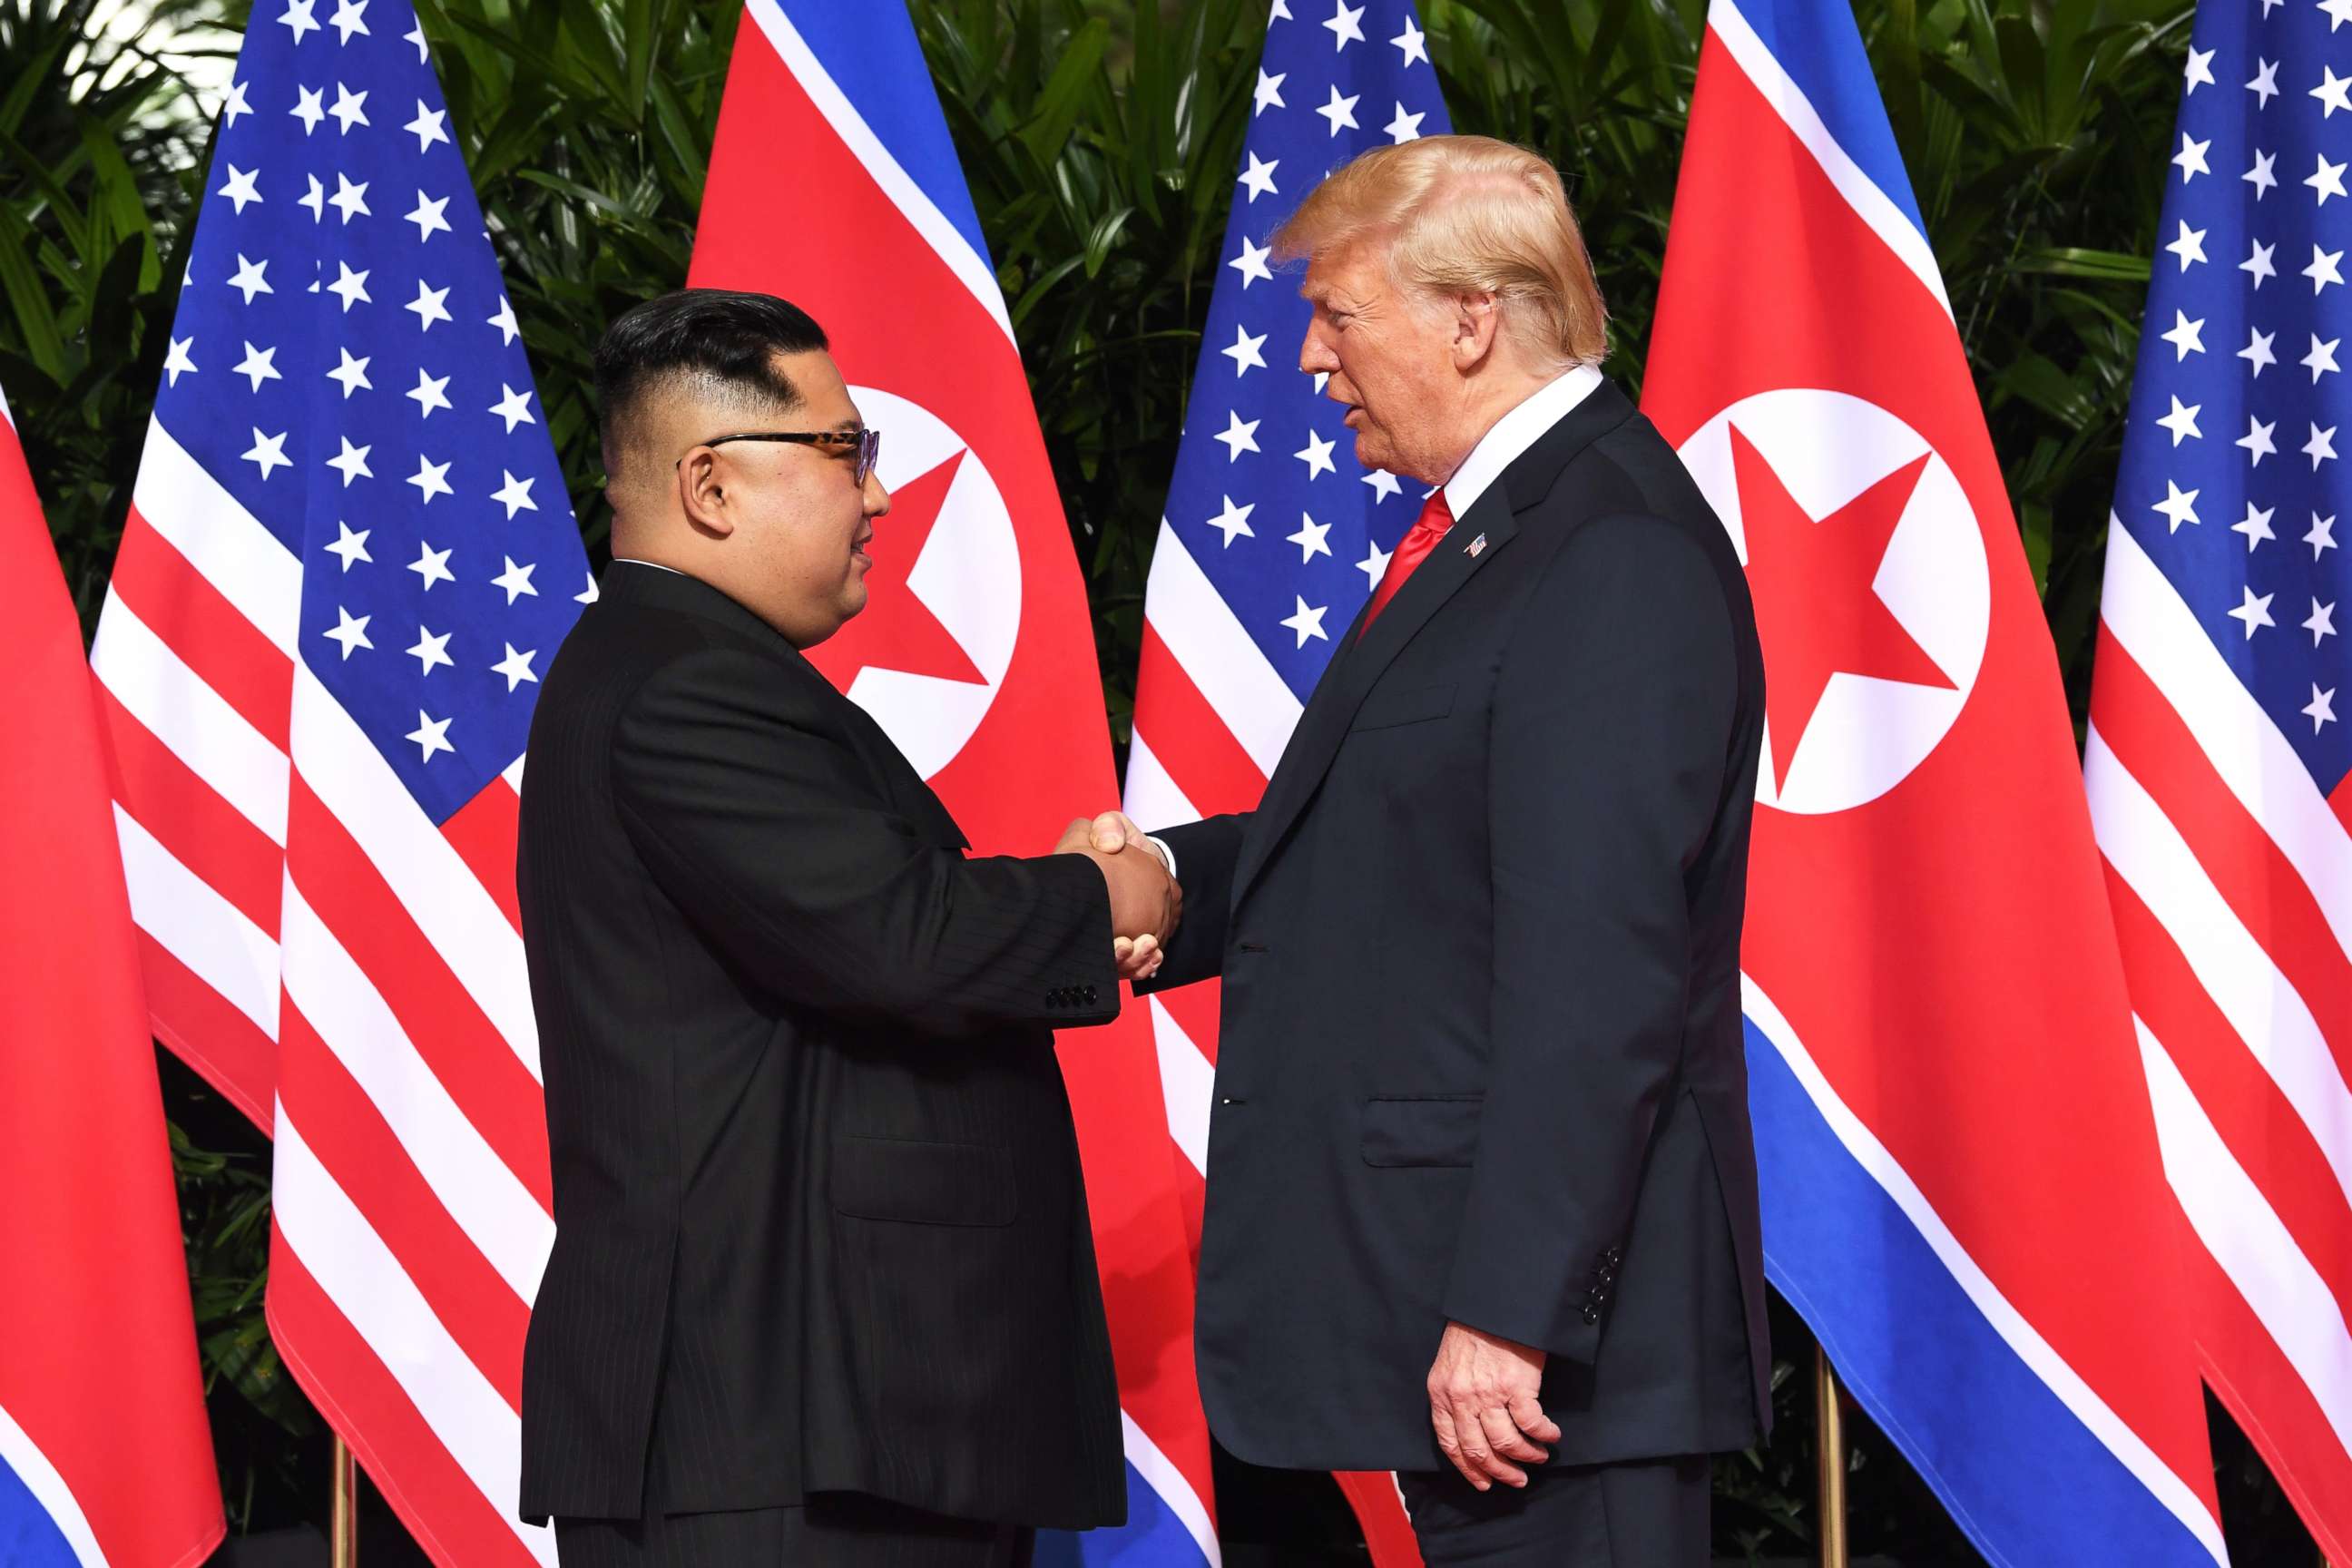 PHOTO: North Korea's leader Kim Jong Un shakes hands with President Donald Trump at the start of their historic summit, at the Capella Hotel on Sentosa island in Singapore on June 12, 2018.